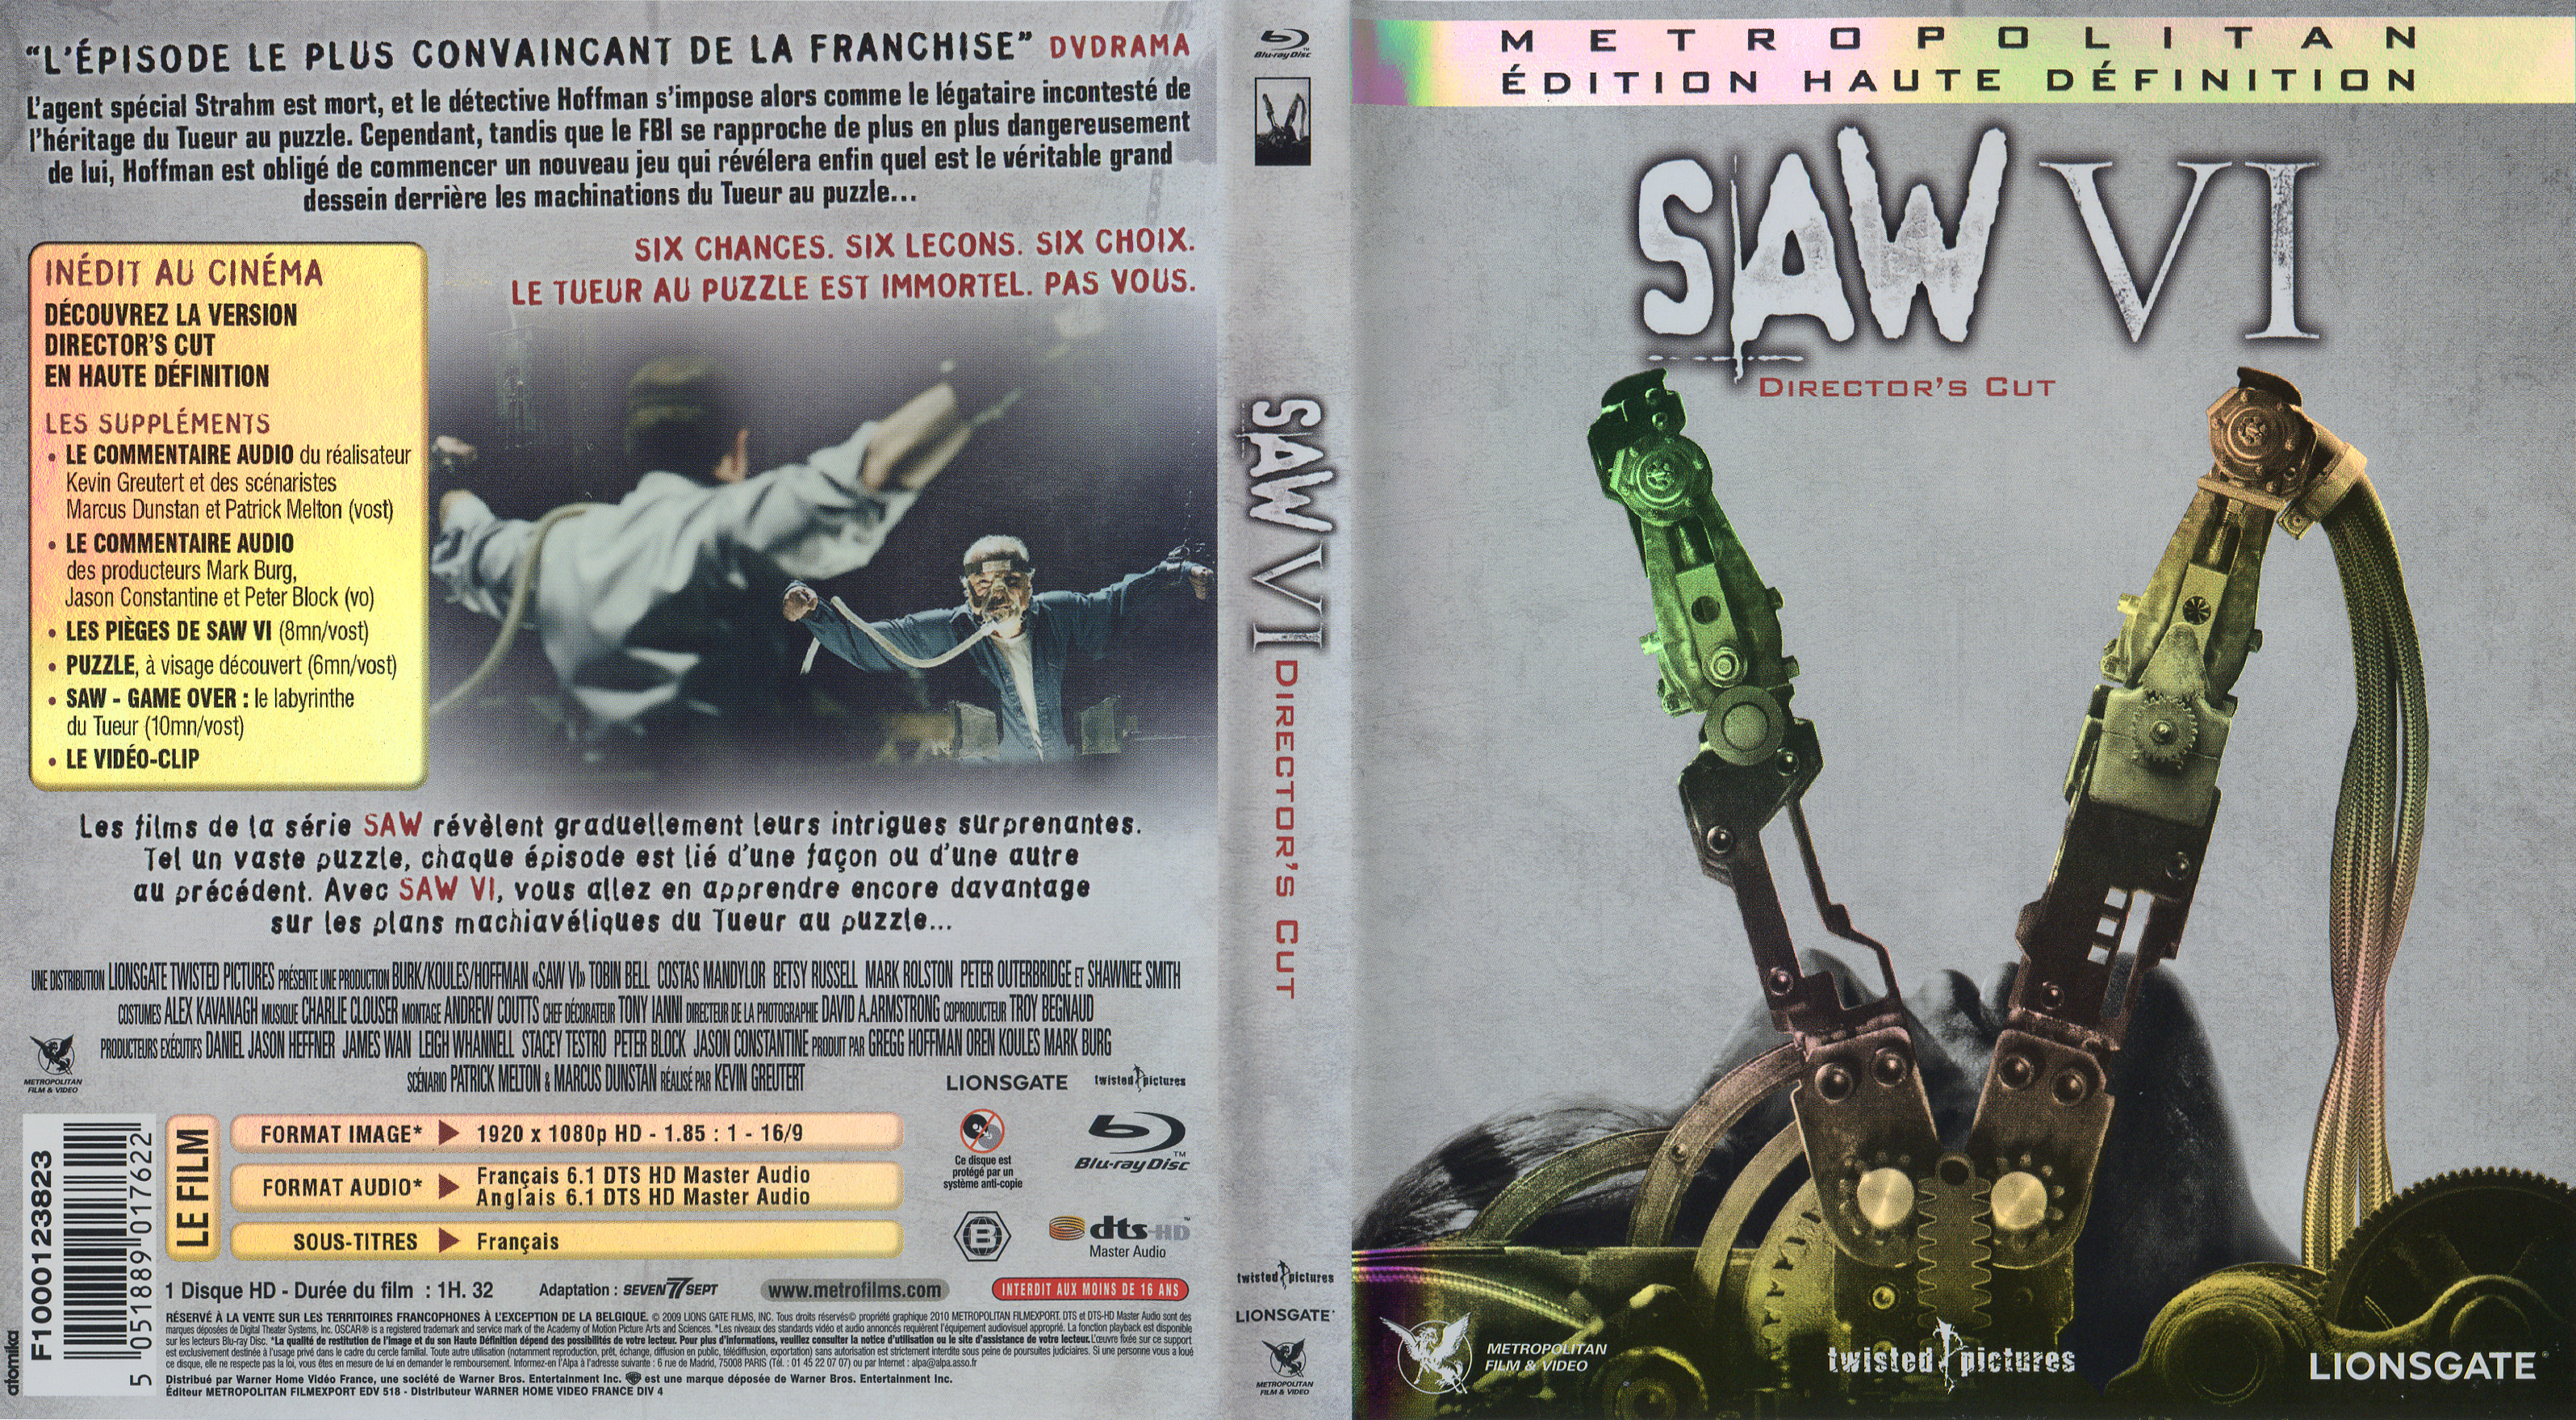 Jaquette DVD Saw 6 (BLU-RAY)